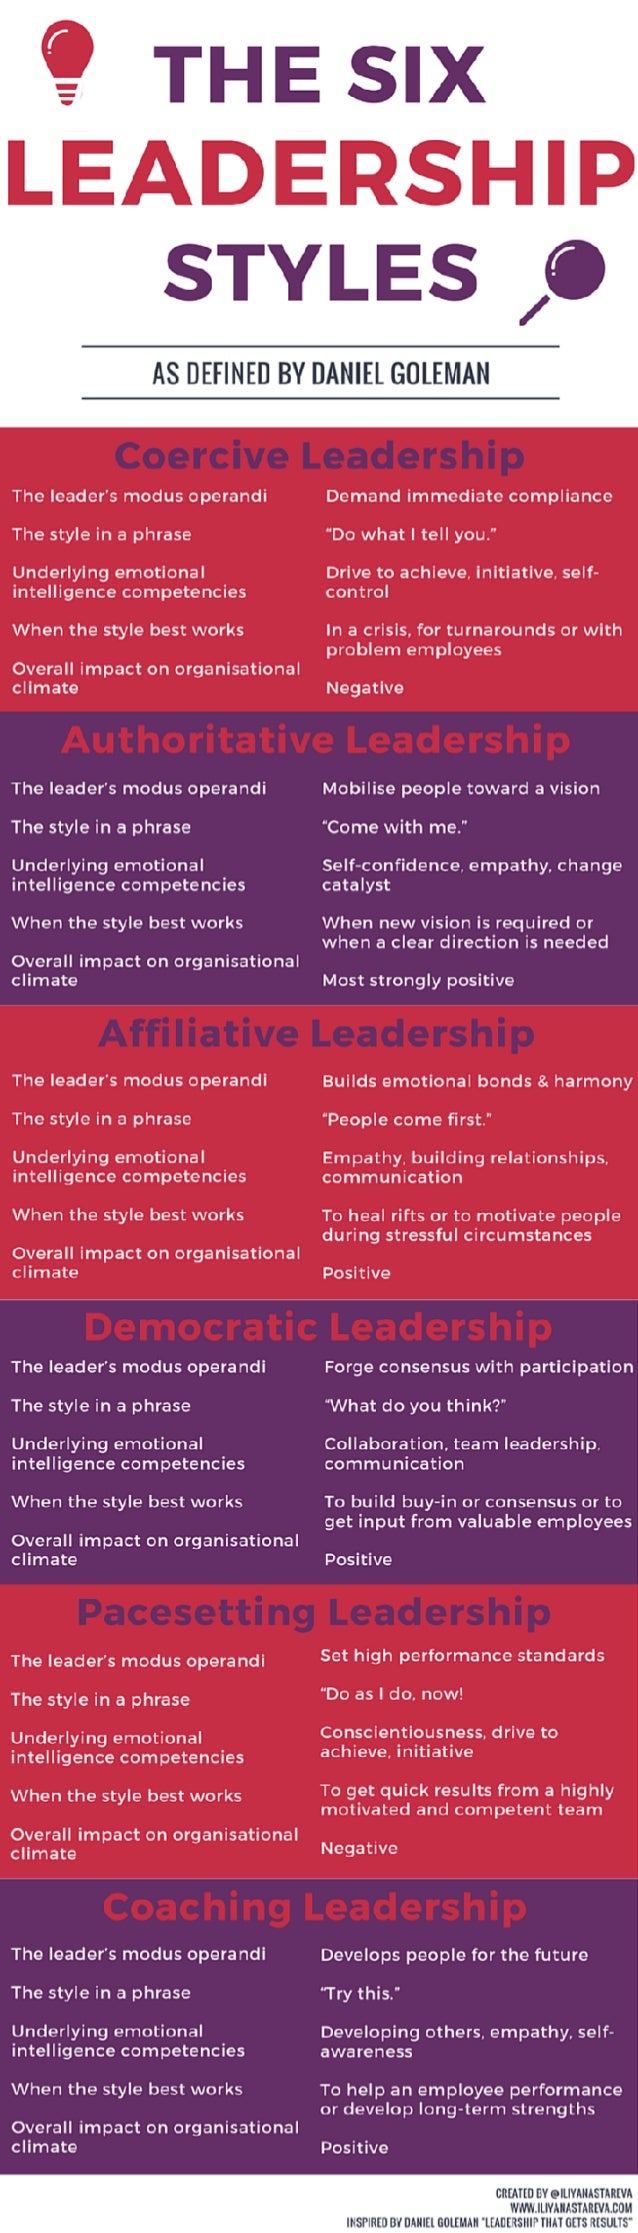 The Six Leadership Styles Infographic